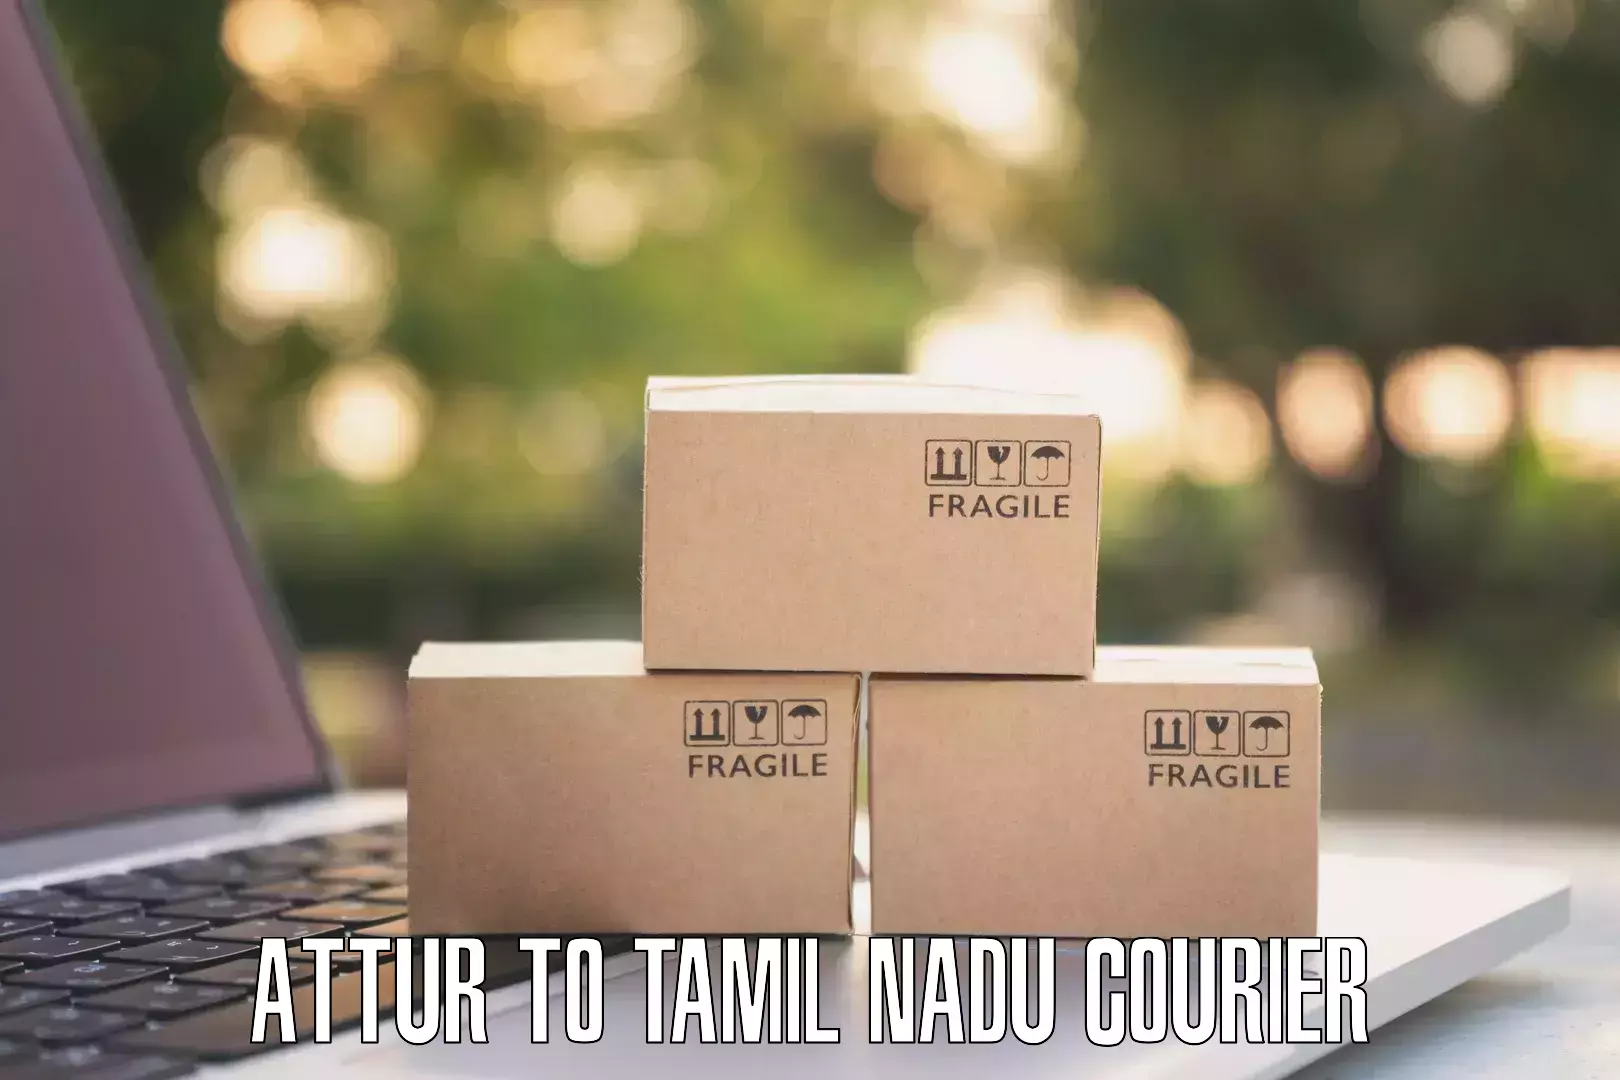 Reliable delivery network Attur to Viluppuram